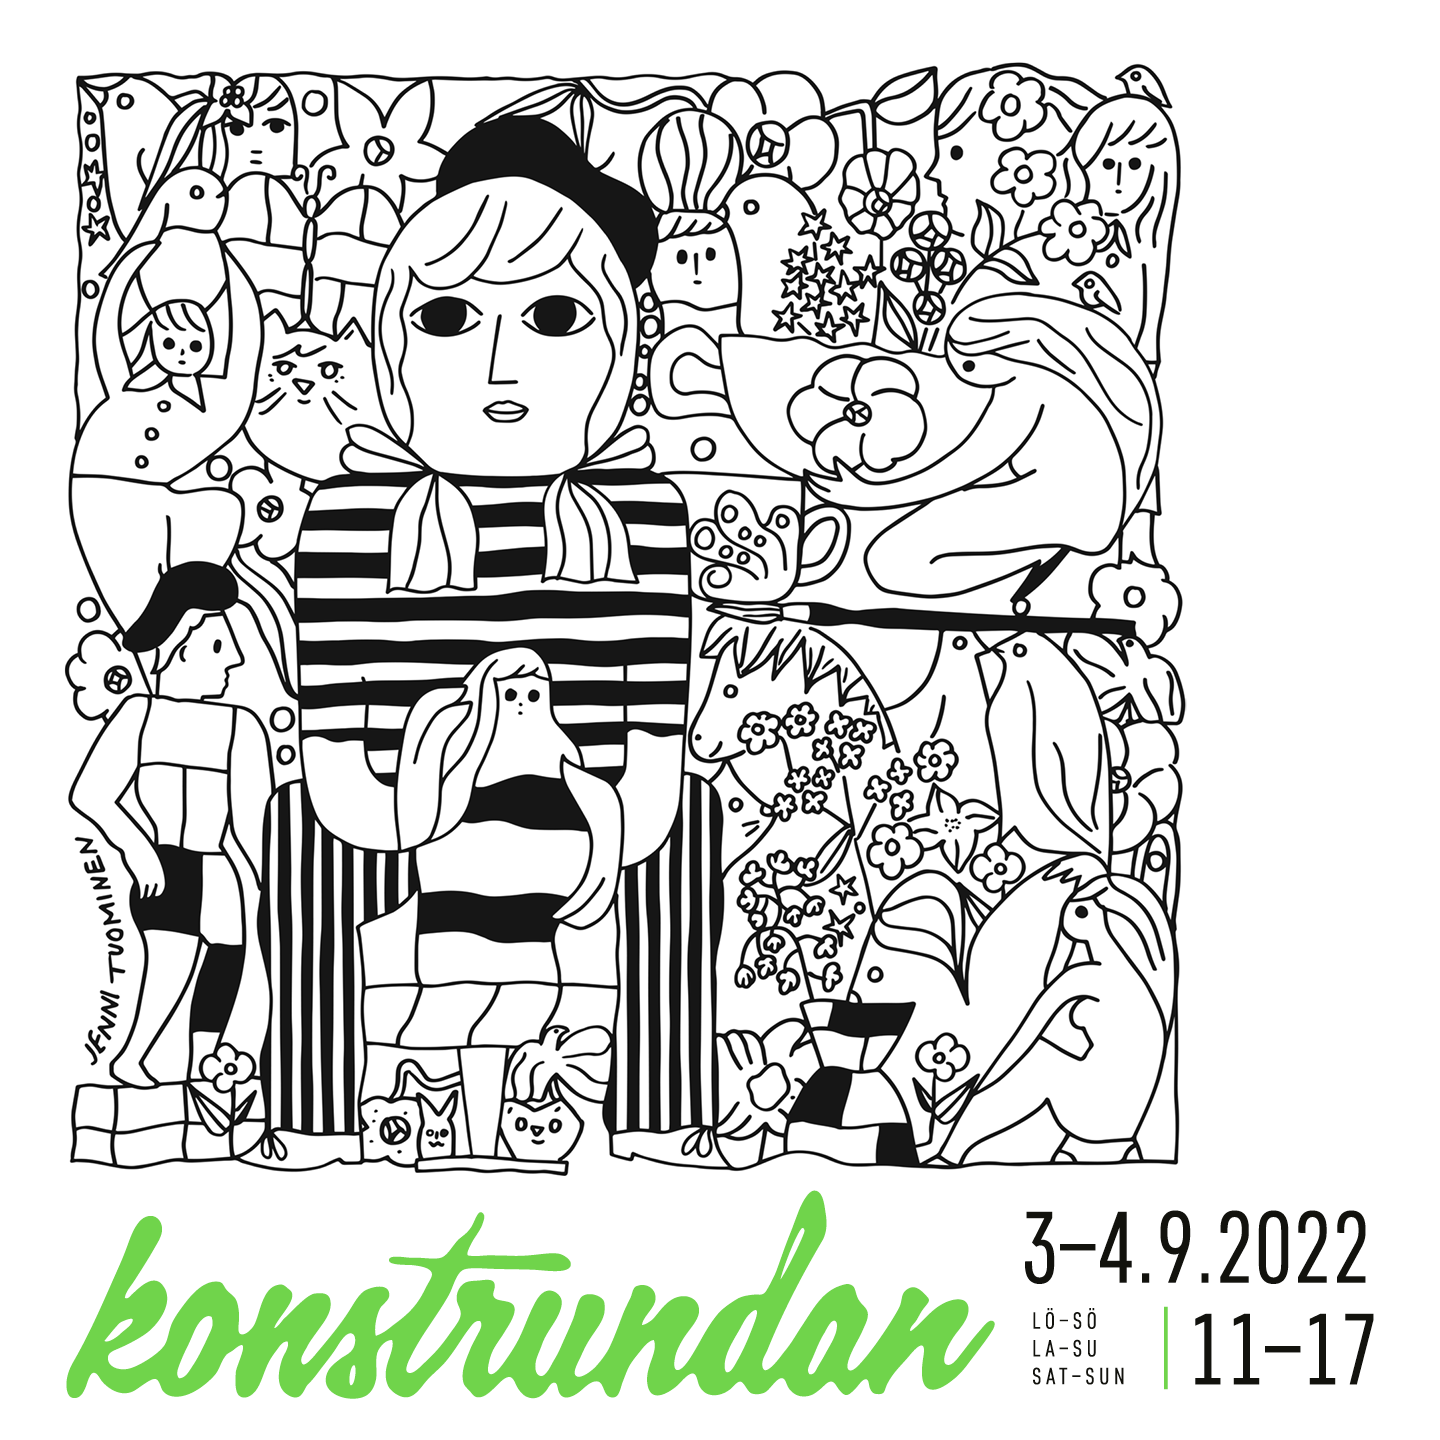 black and white illustration with human and animal figures by illustrator Jenni Tuominen for Konstrundan 2022